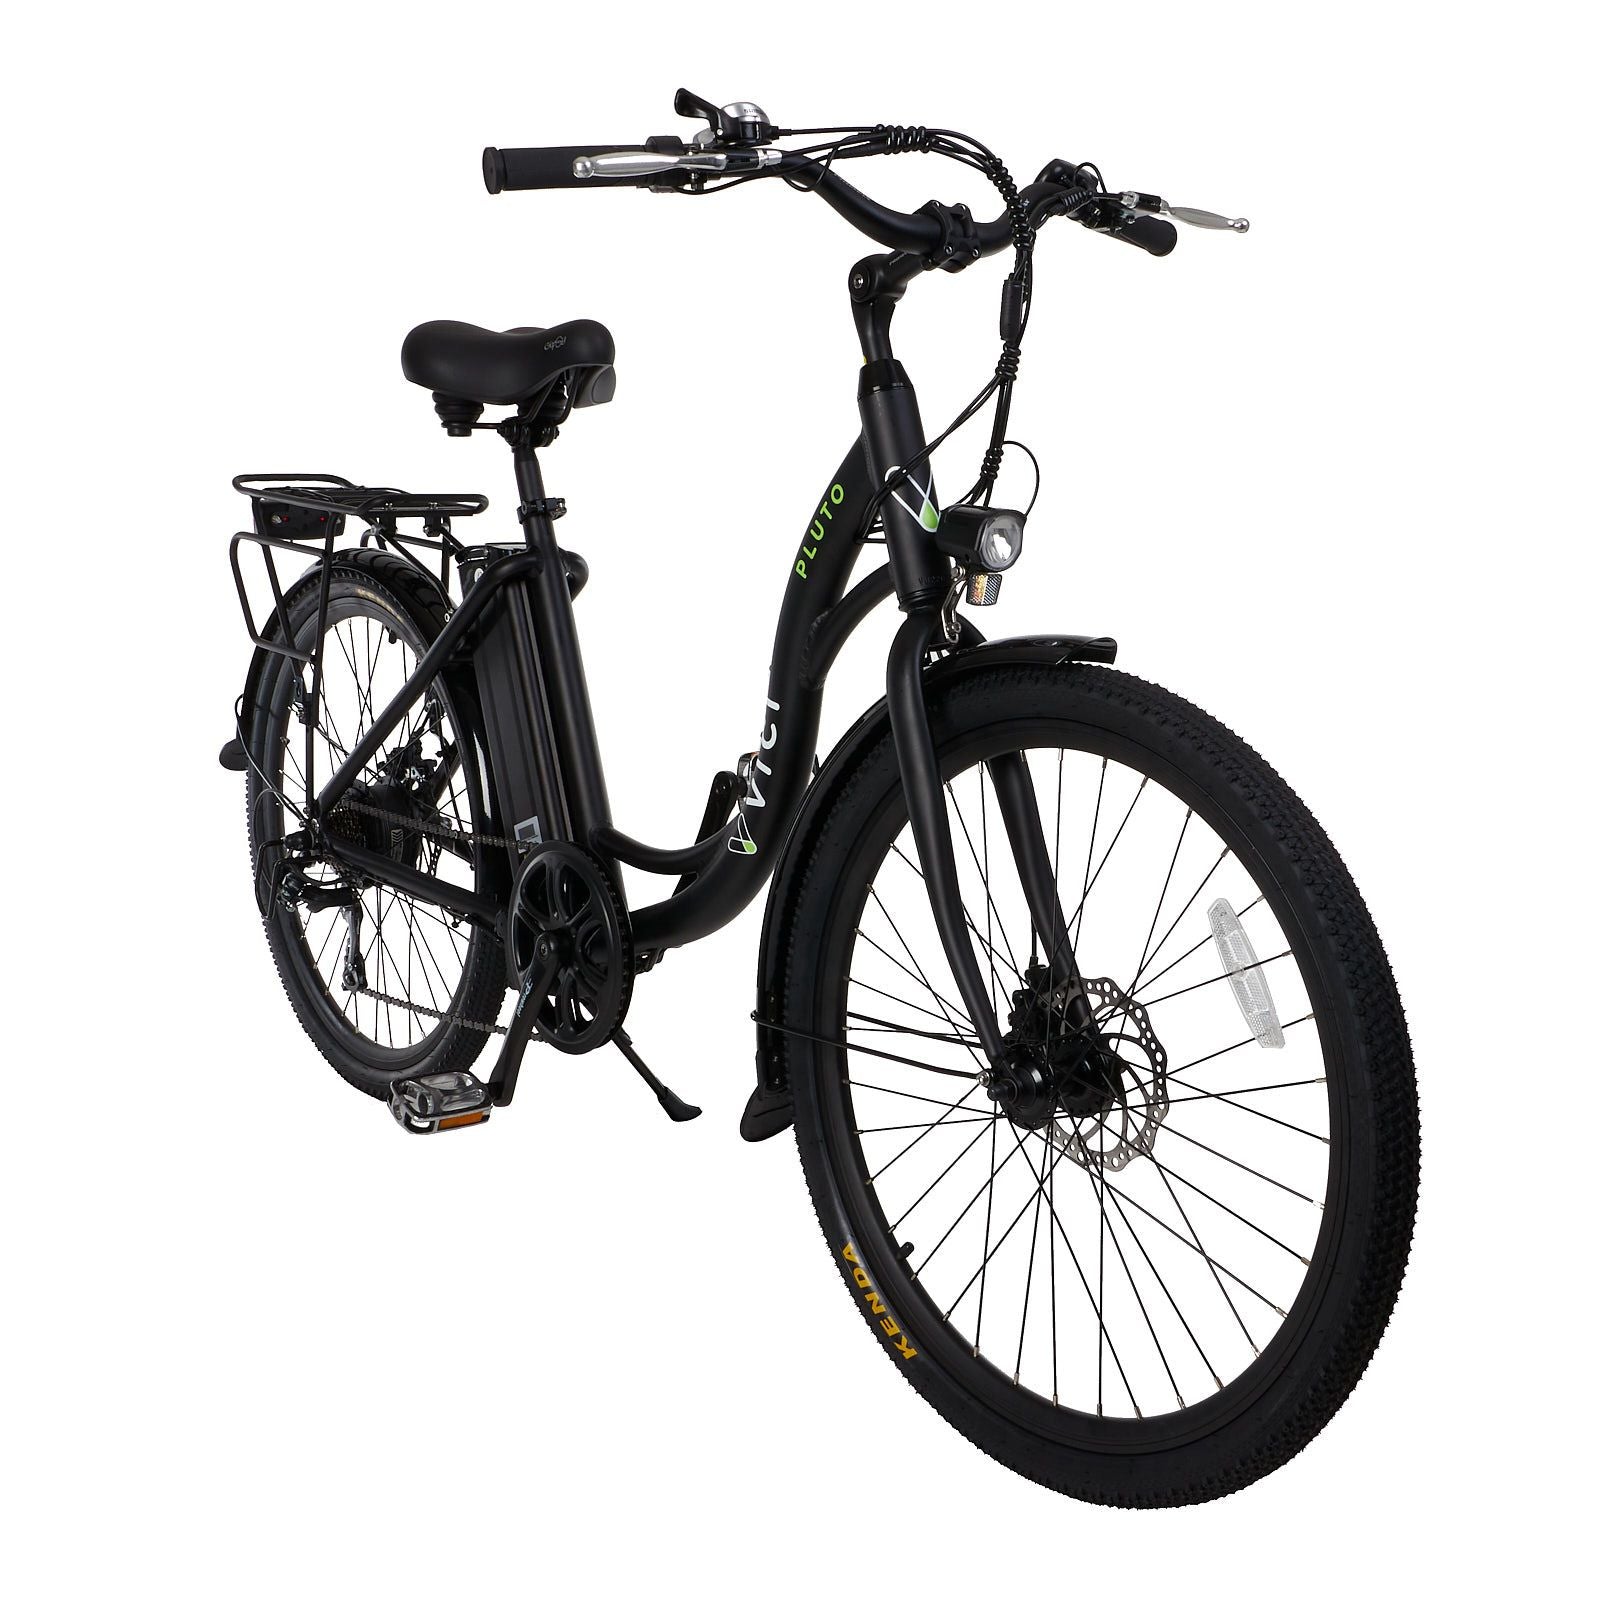 VICI PLUTO ELECTRIC BICYCLE - 26x1.95